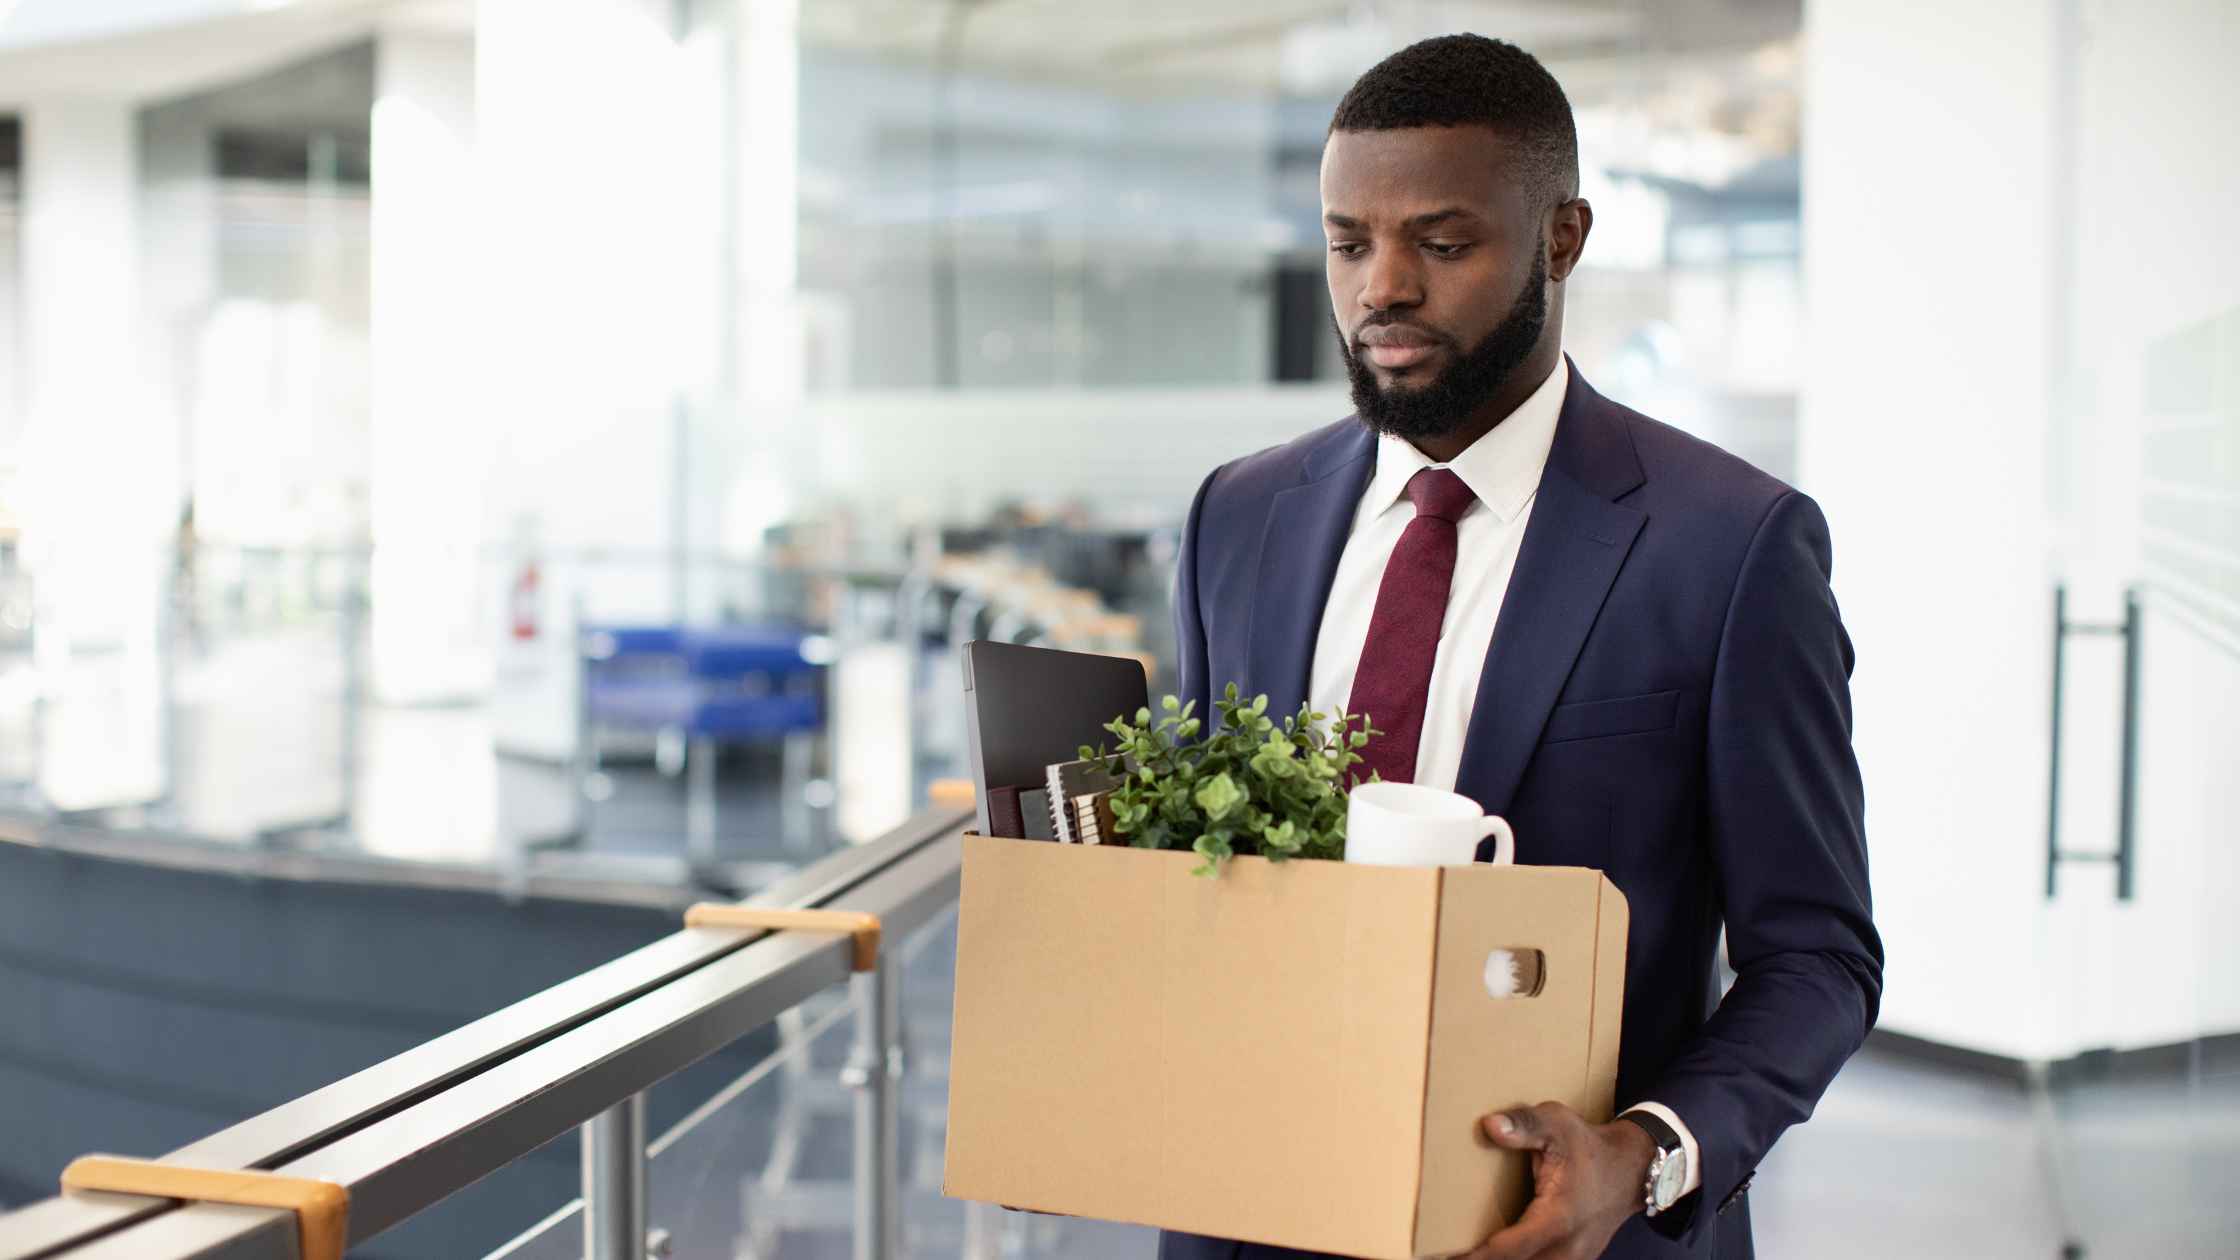 African American person in a suite leaving the office with a box of stuff as if laid off or fired